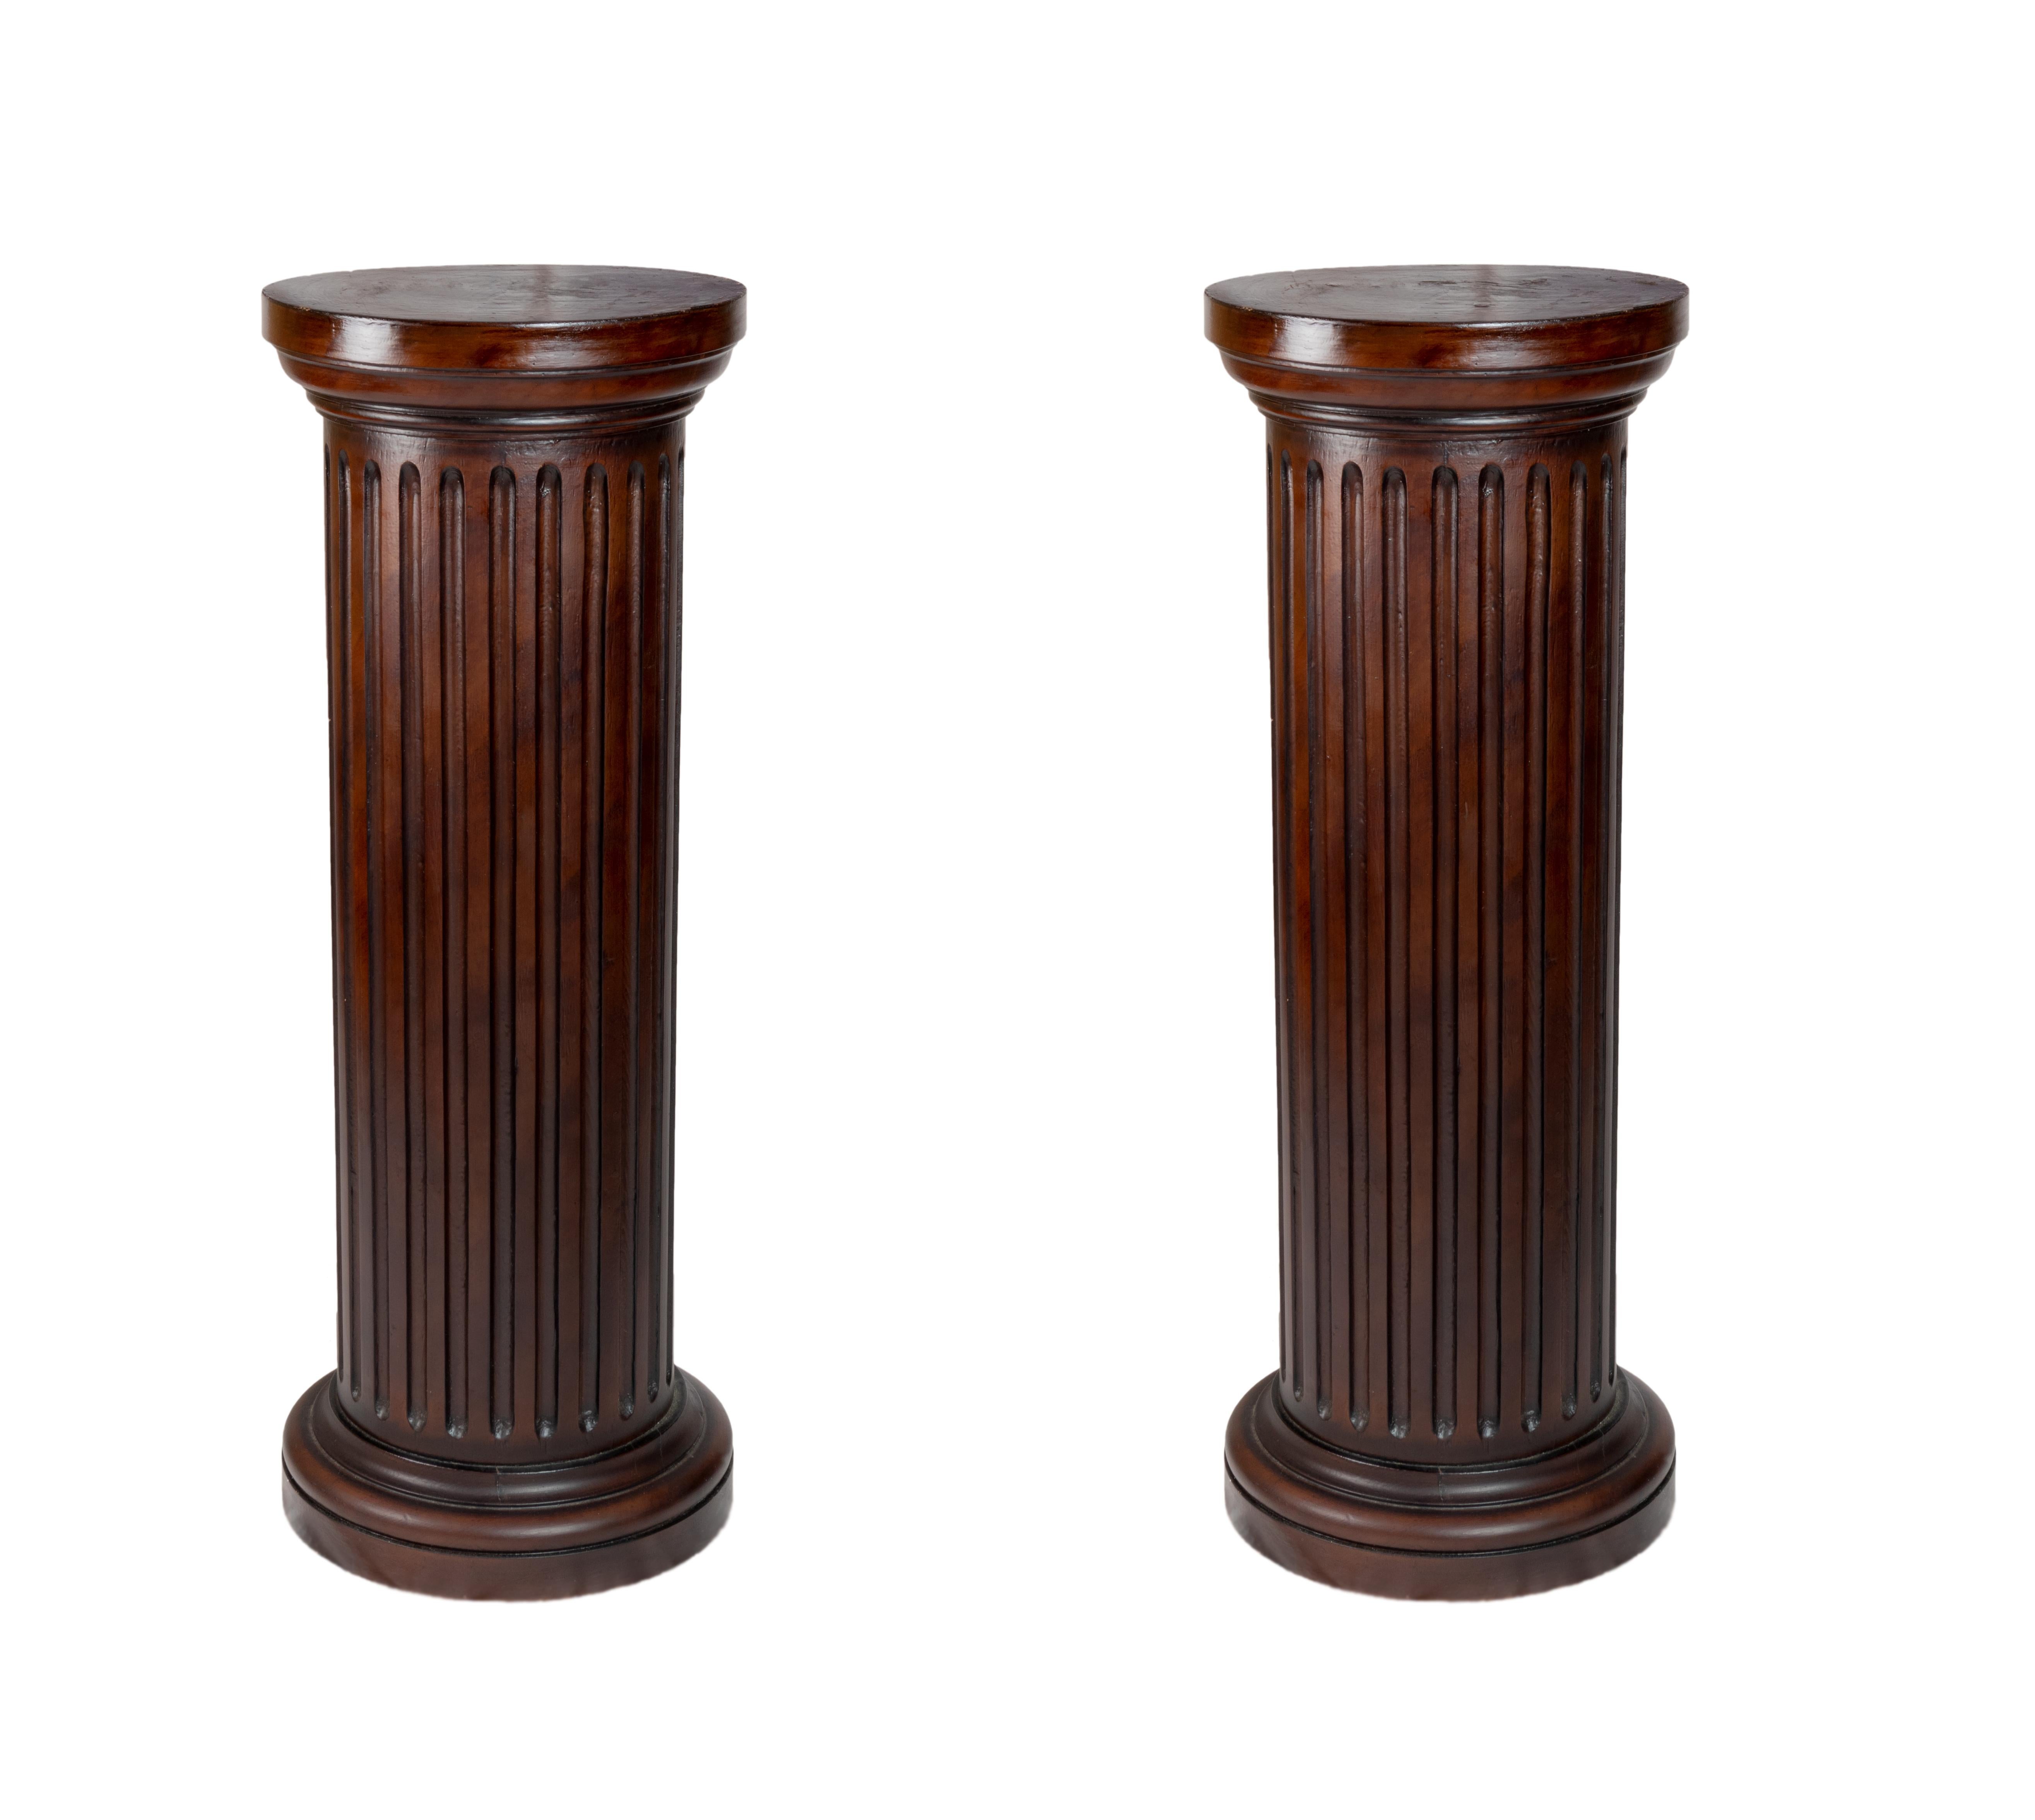  Pair Of French Fluted Wood Columns, 19th Century In Good Condition For Sale In Lisbon, PT